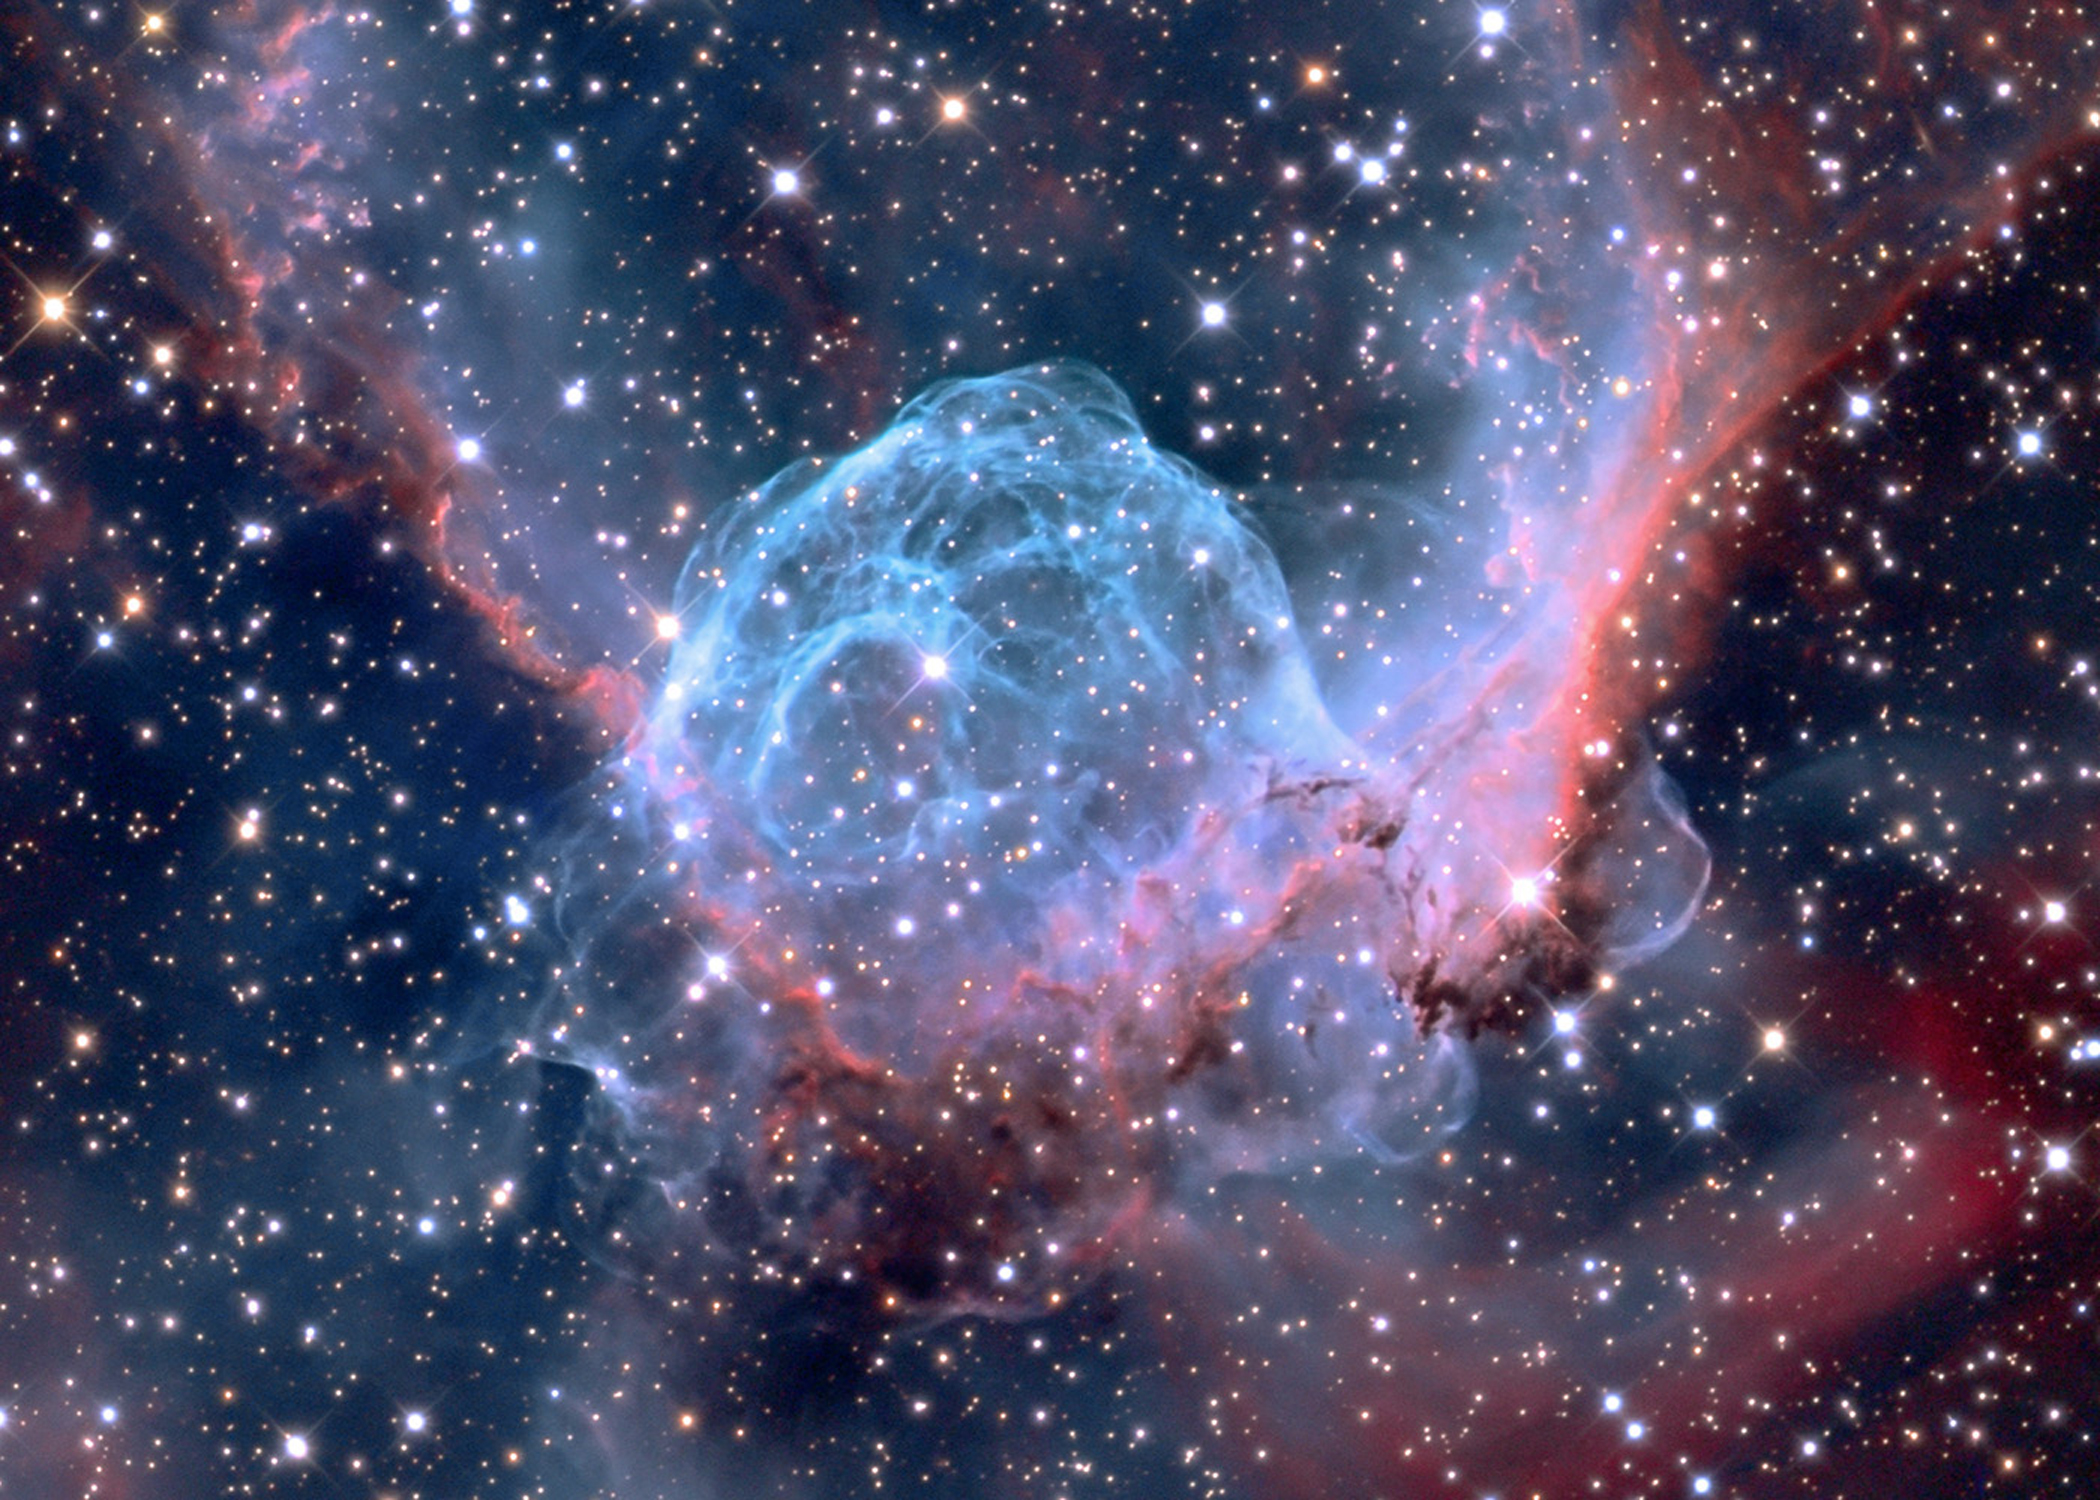 This nebula named "Thor's Helmet" is powered by a central "Wolf Rayet" star whose explosive tantrums blow huge bubbles of gas and make them glow like neon. This star is easily 20 times the mass of the Sun and located 15,000 light years away. Eventually the star's instability will lead it to explode as a supernova. The photo was captured at the Mount Lemmon SkyCenter in Arizona and released on Jan. 3, 2015.